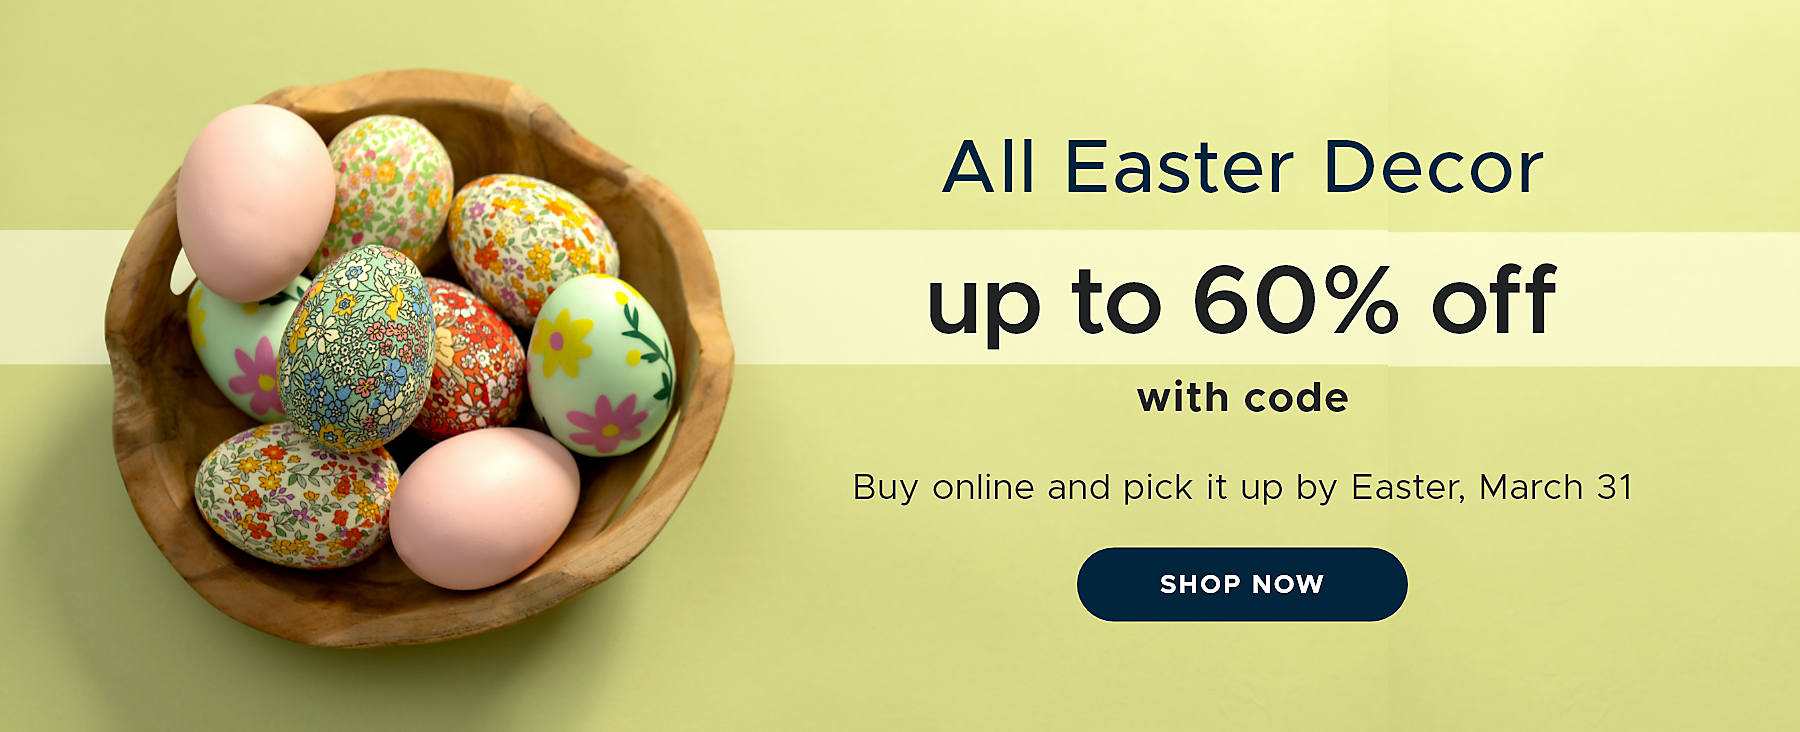 All Easter Decor up to 600% off Buy online and pick it up by Easter, March 31 Shop Now